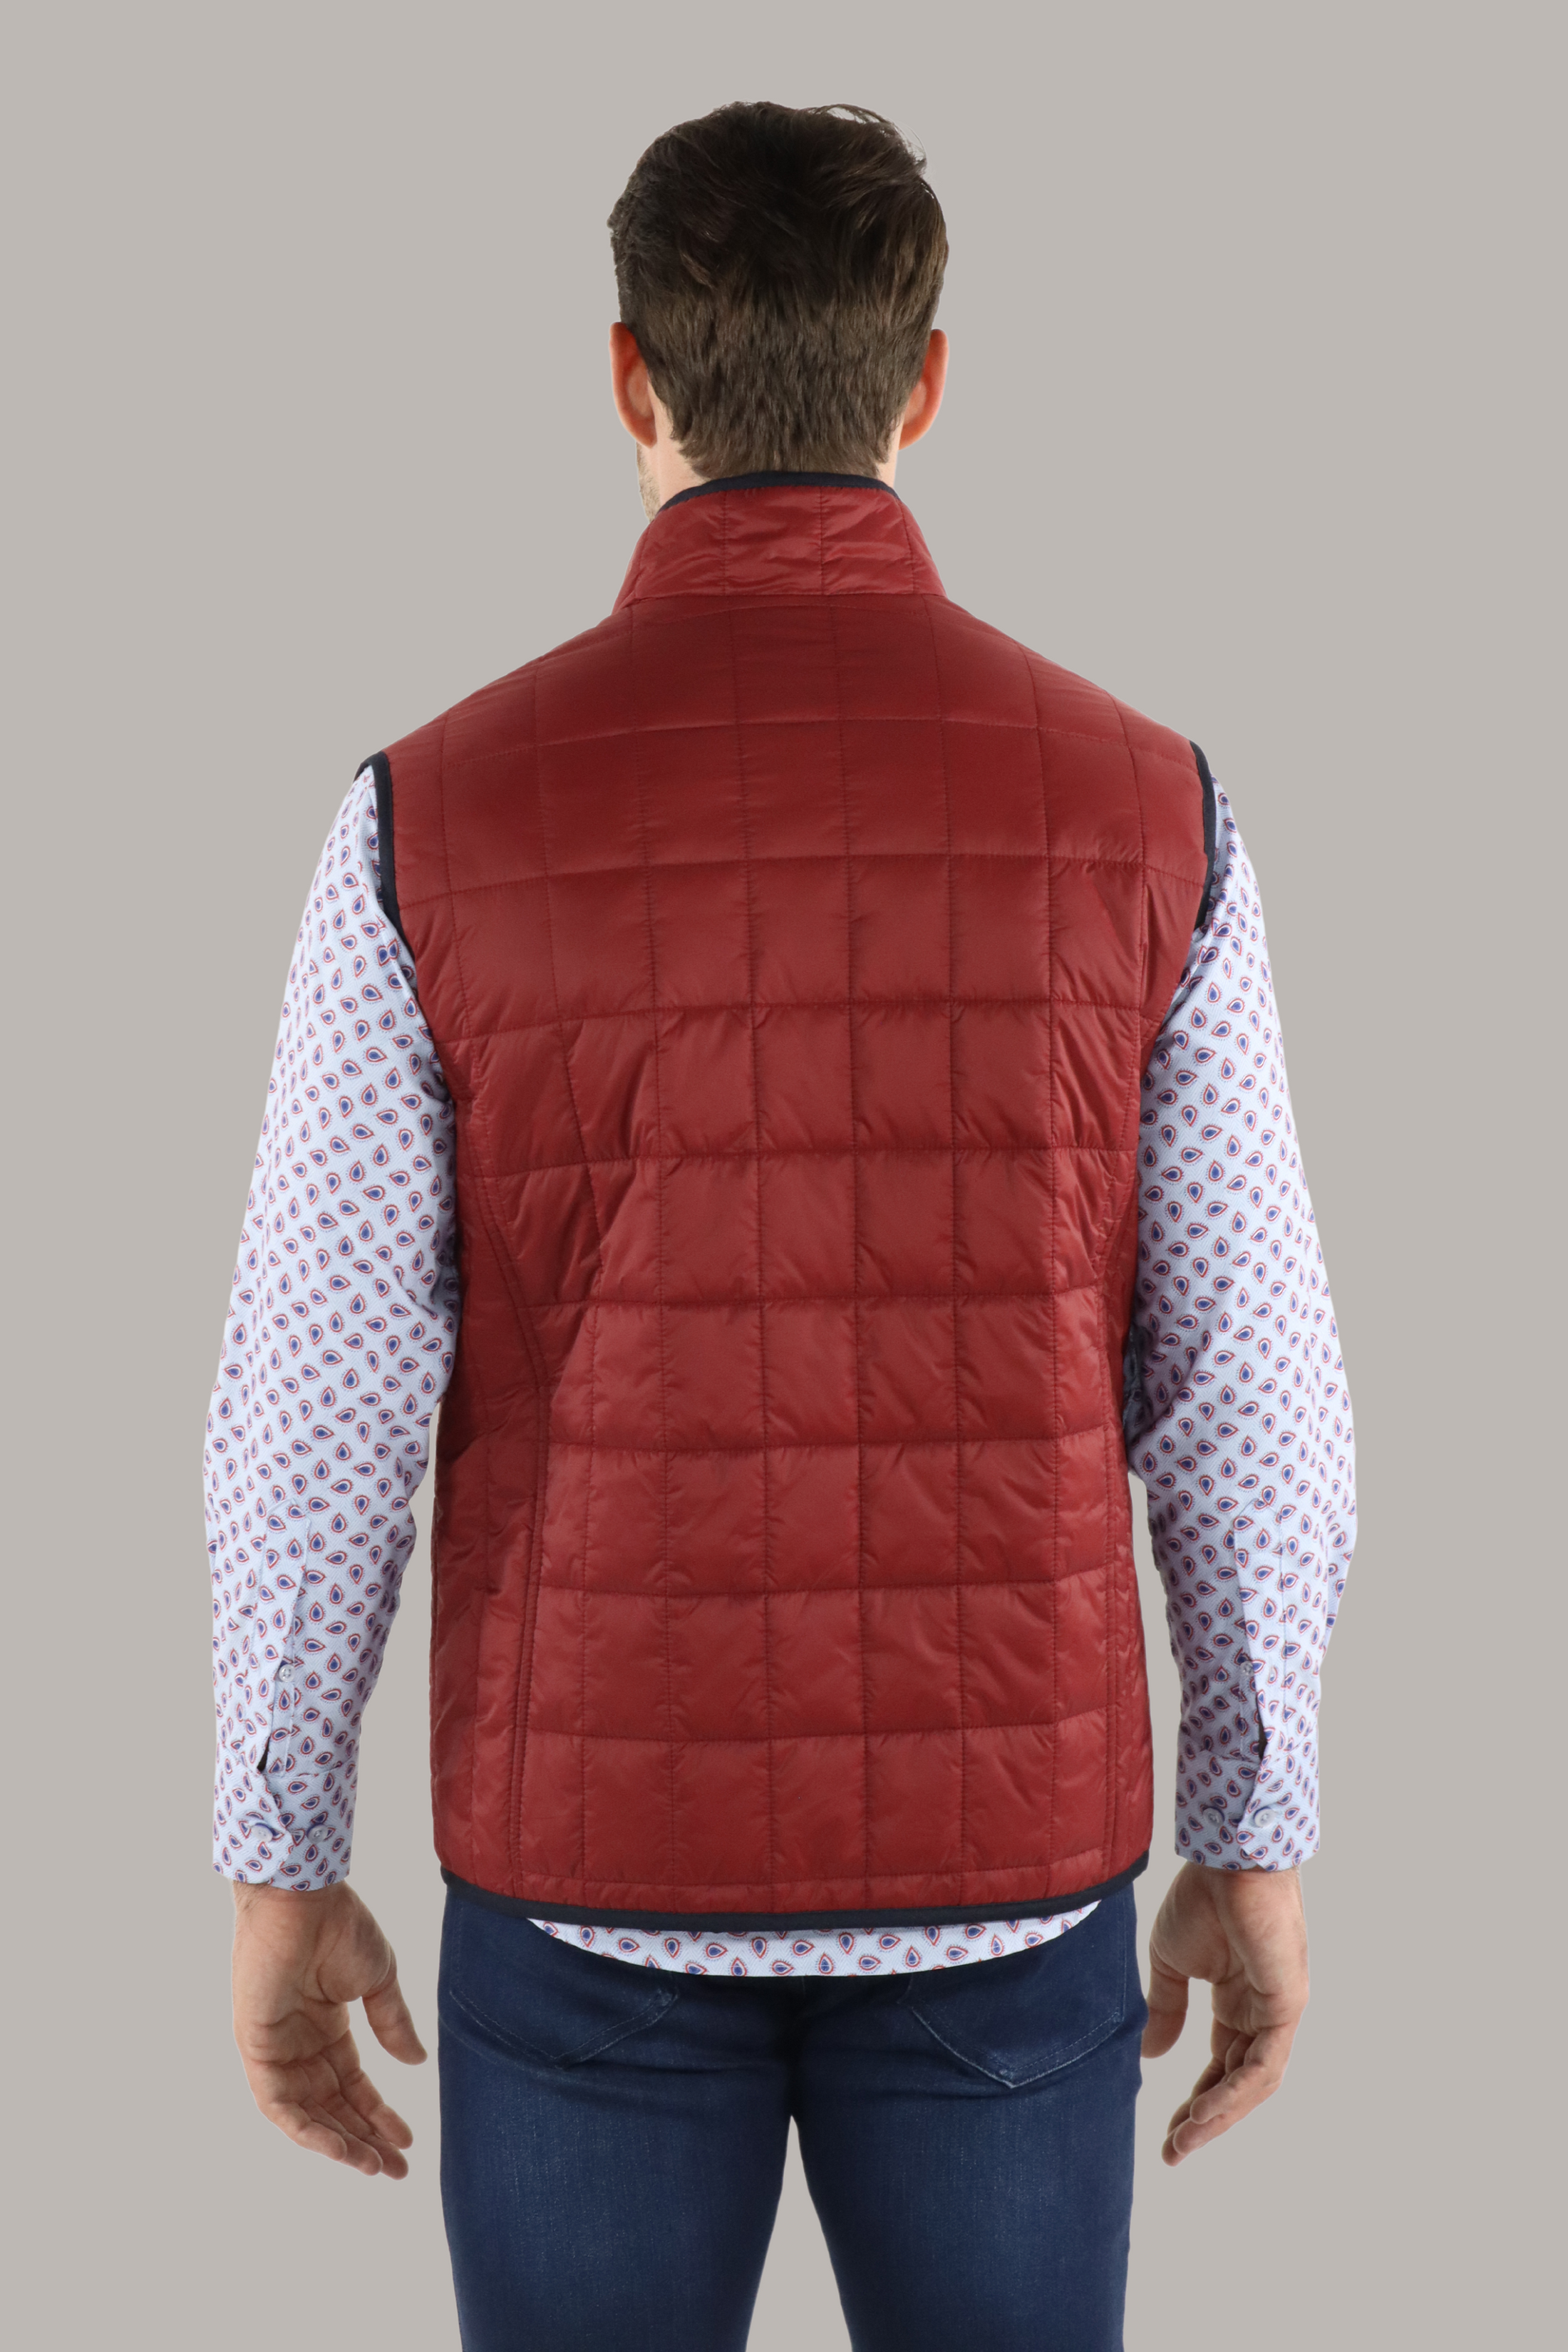 Full Zip Red Quilted Vest